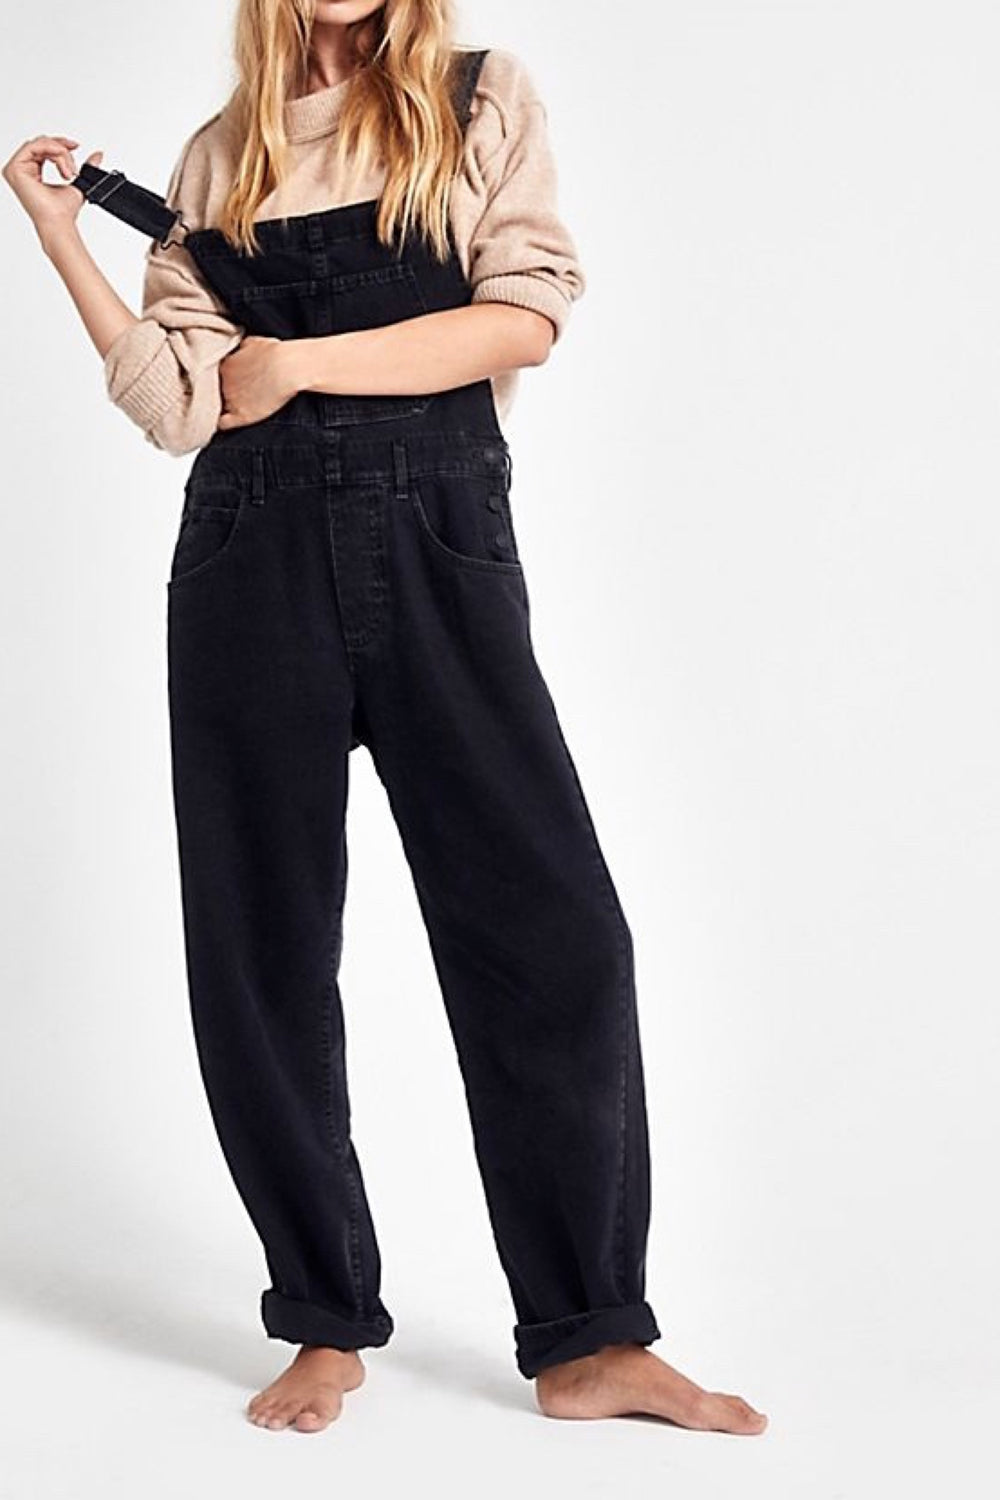 Mineral Black Ziggy Overall